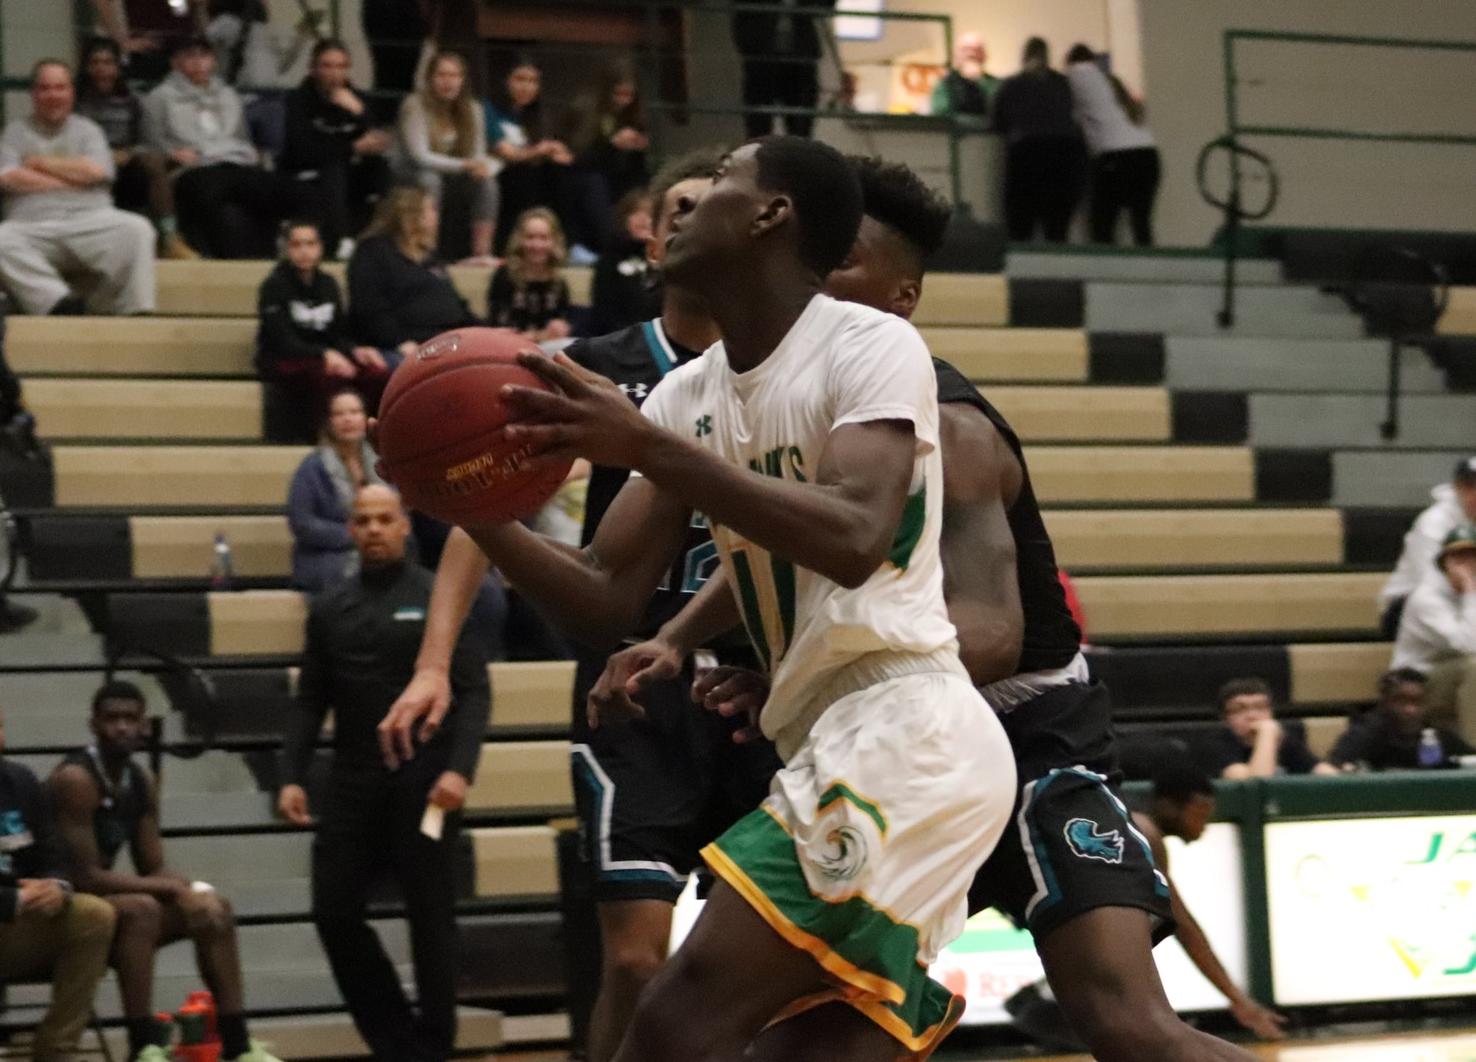 Thomas notched a double-double in a loss to Sinclair Community College